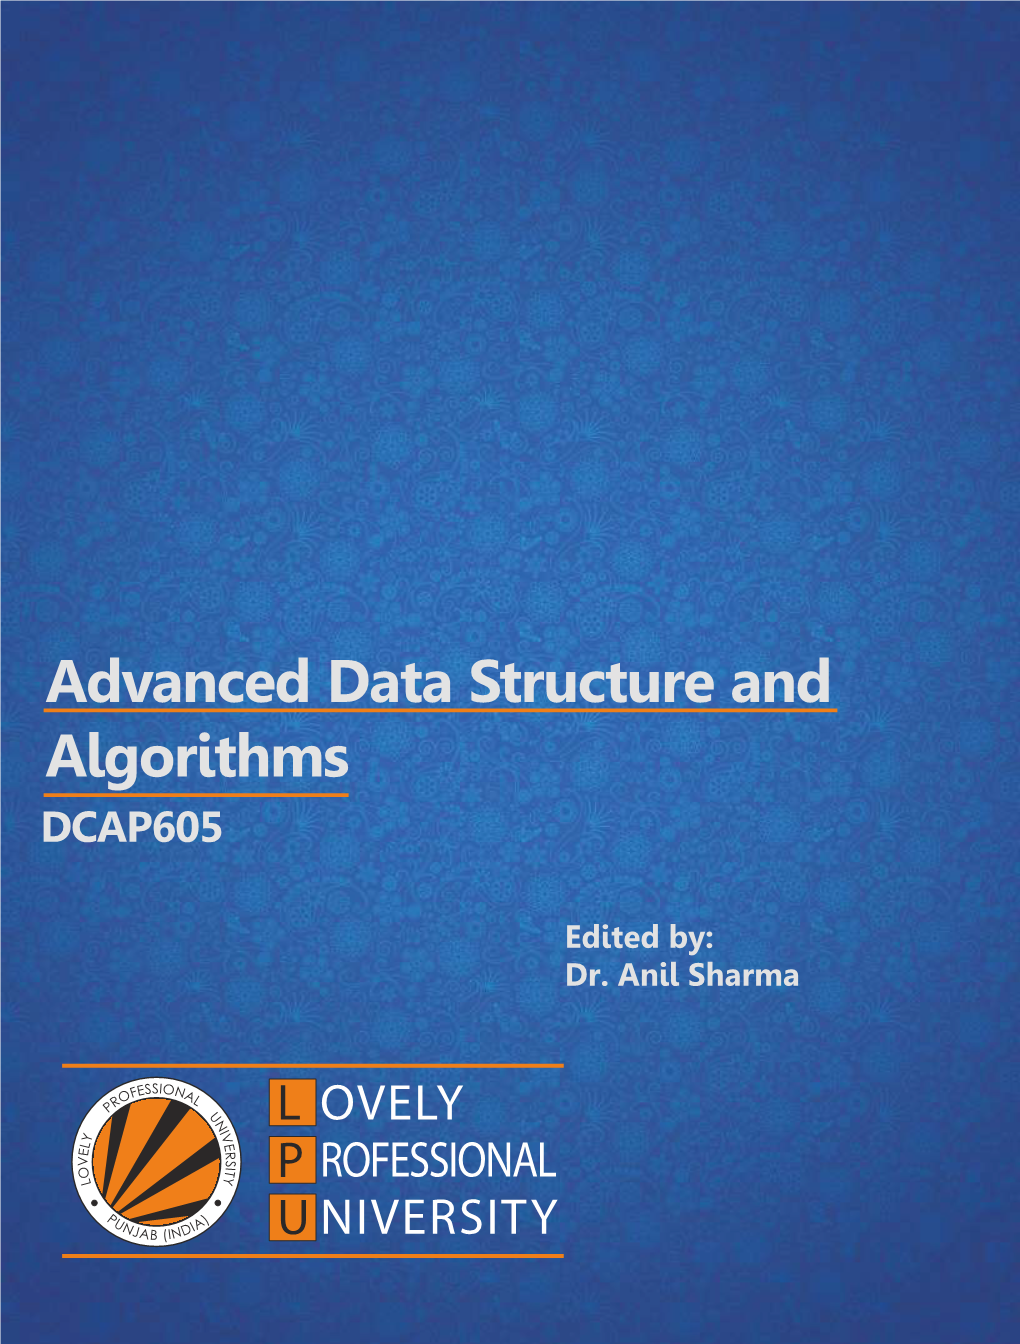 Advanced Data Structure and Algorithms